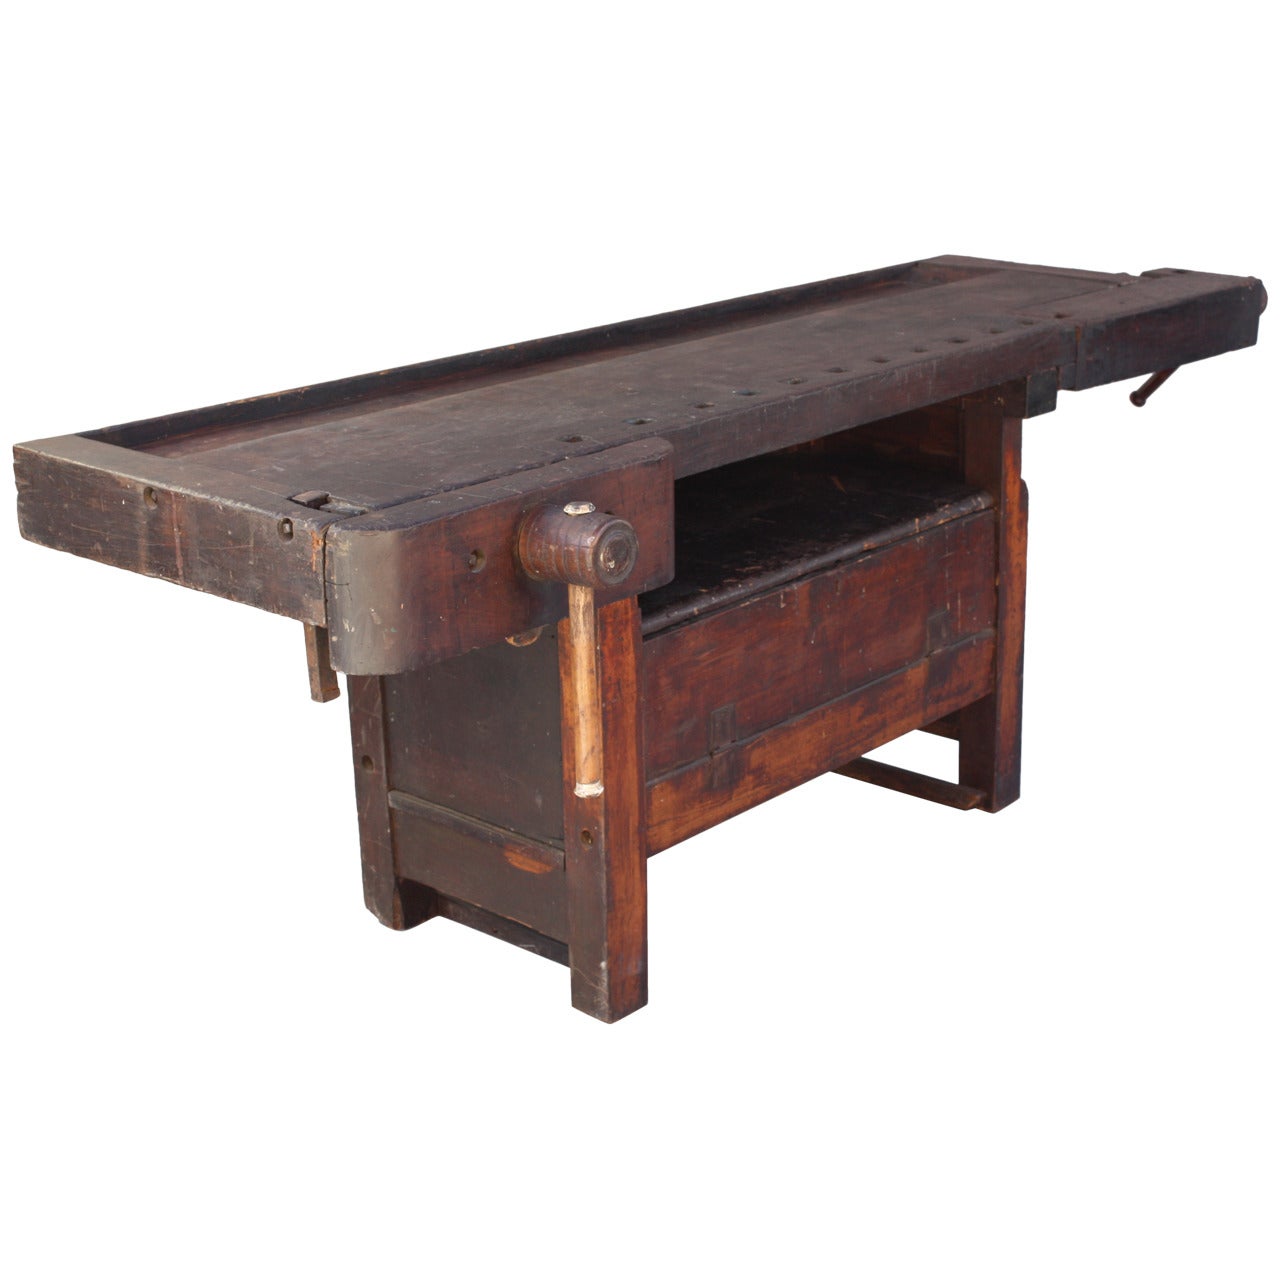 Fantastic Industrial Rustic, Turn of the Century Work Bench